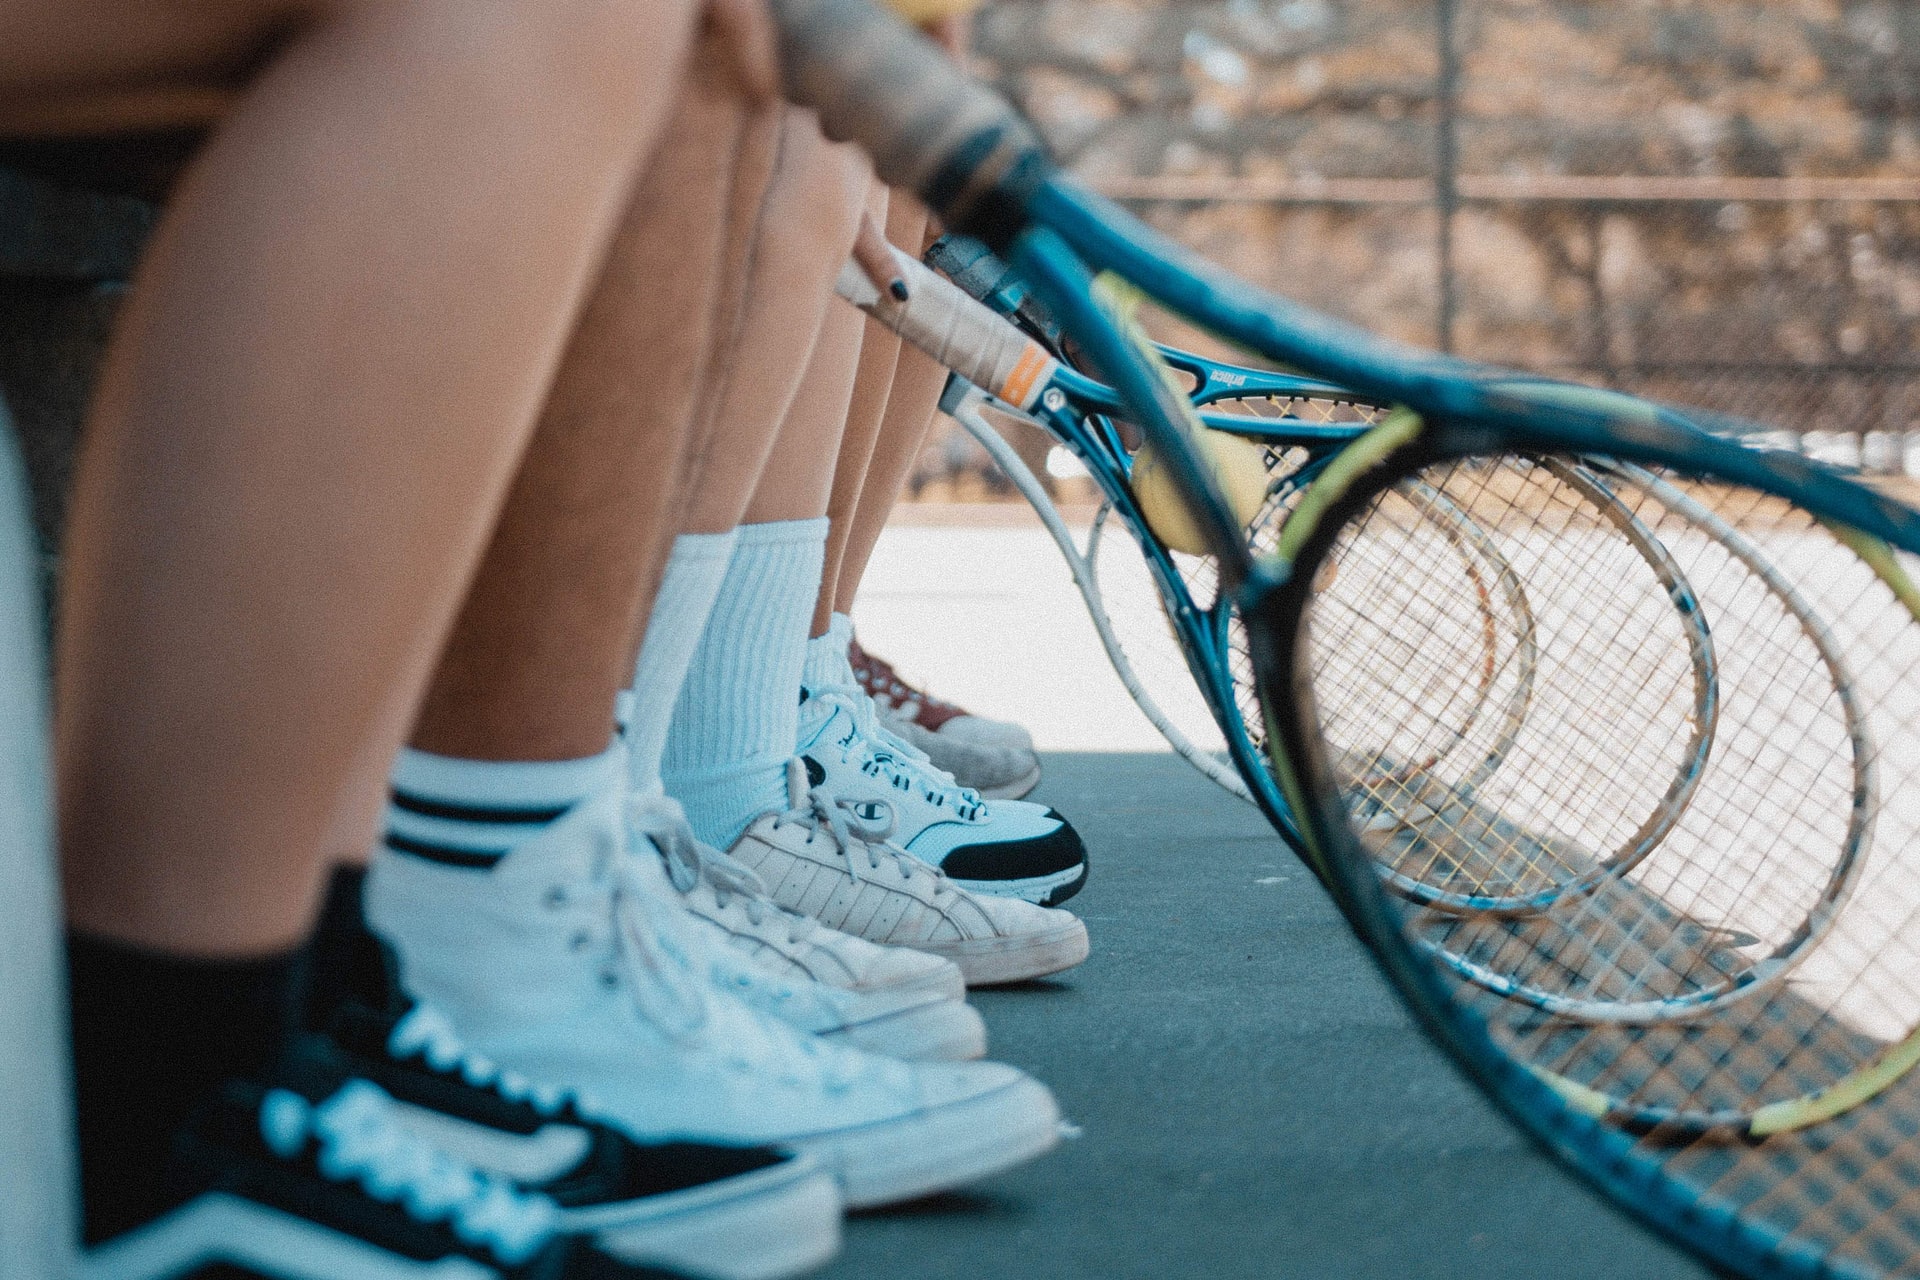 Five sets of legs sitting in a line with their tennis rackets touching the ground